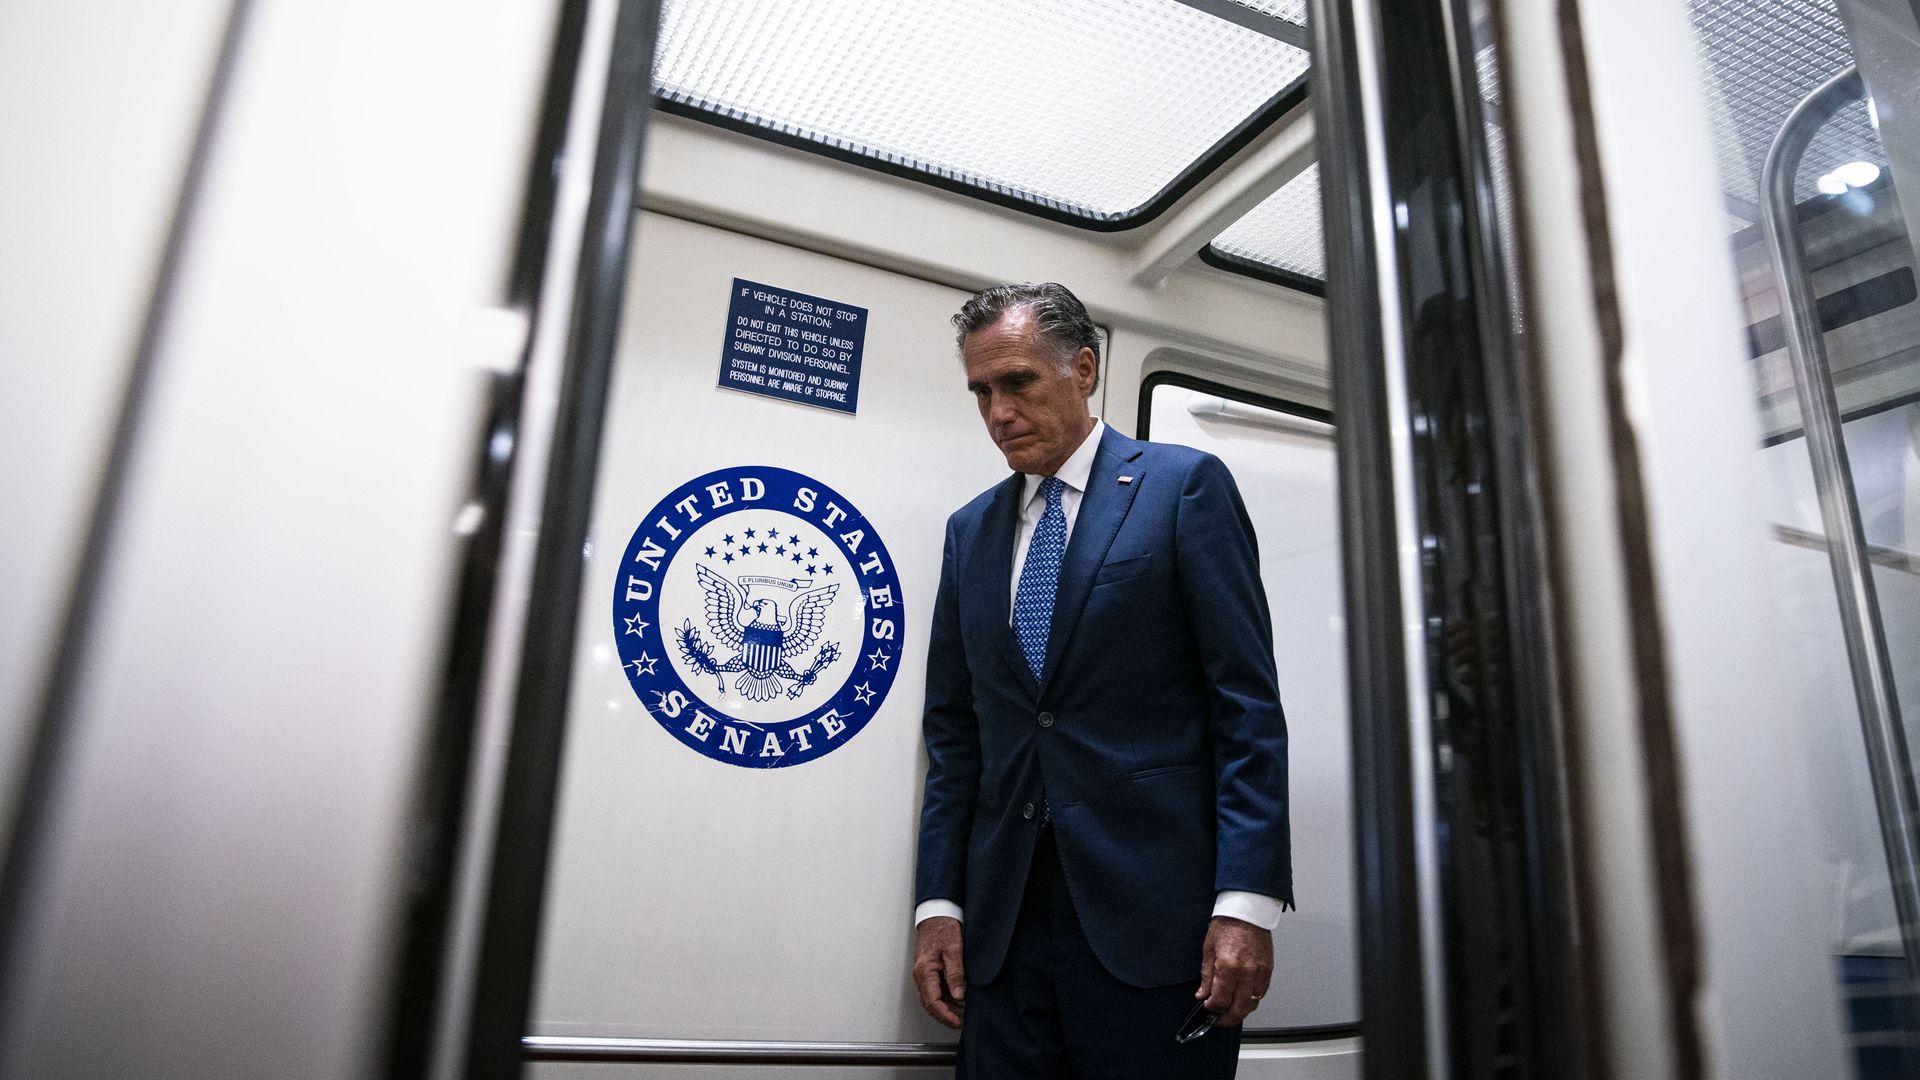 Sen. Mitt Romney is seen standing in a Senate subway car amid his efforts to reach a bipartisan infrastructure deal.